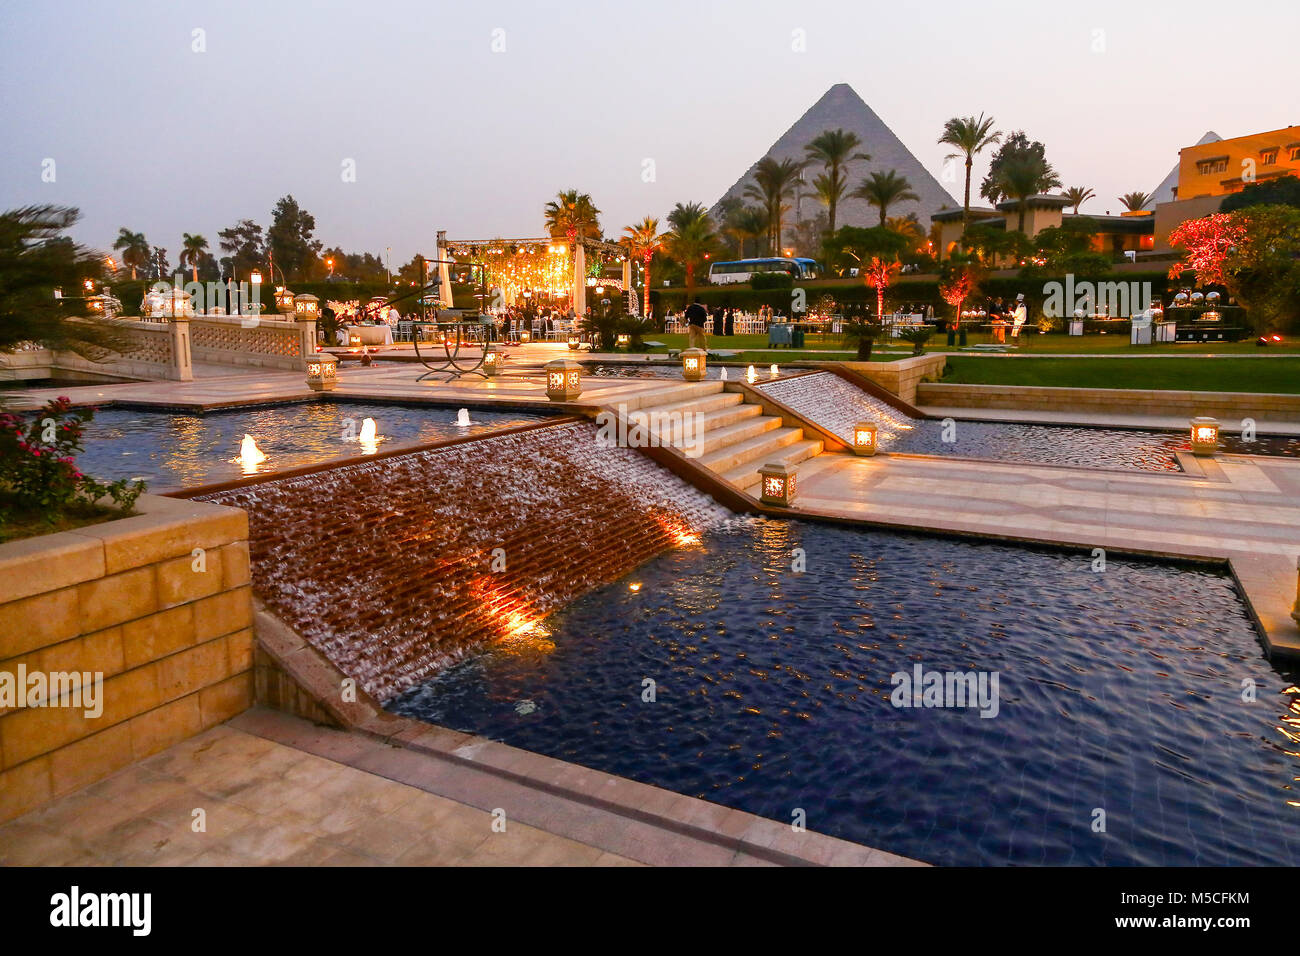 Evening or night time view of the Mena House Hotel, with the Pyramids in the background, Giza, Cairo, Egypt, North Africa Stock Photo